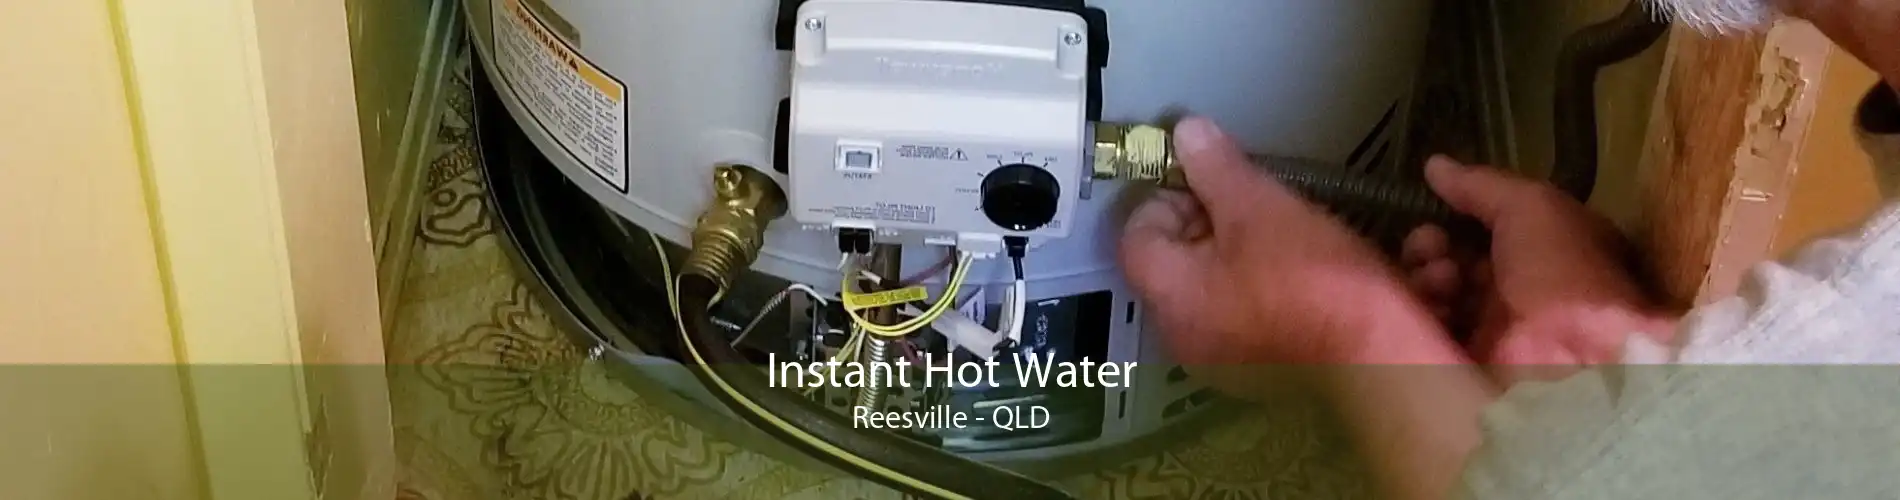 Instant Hot Water Reesville - QLD